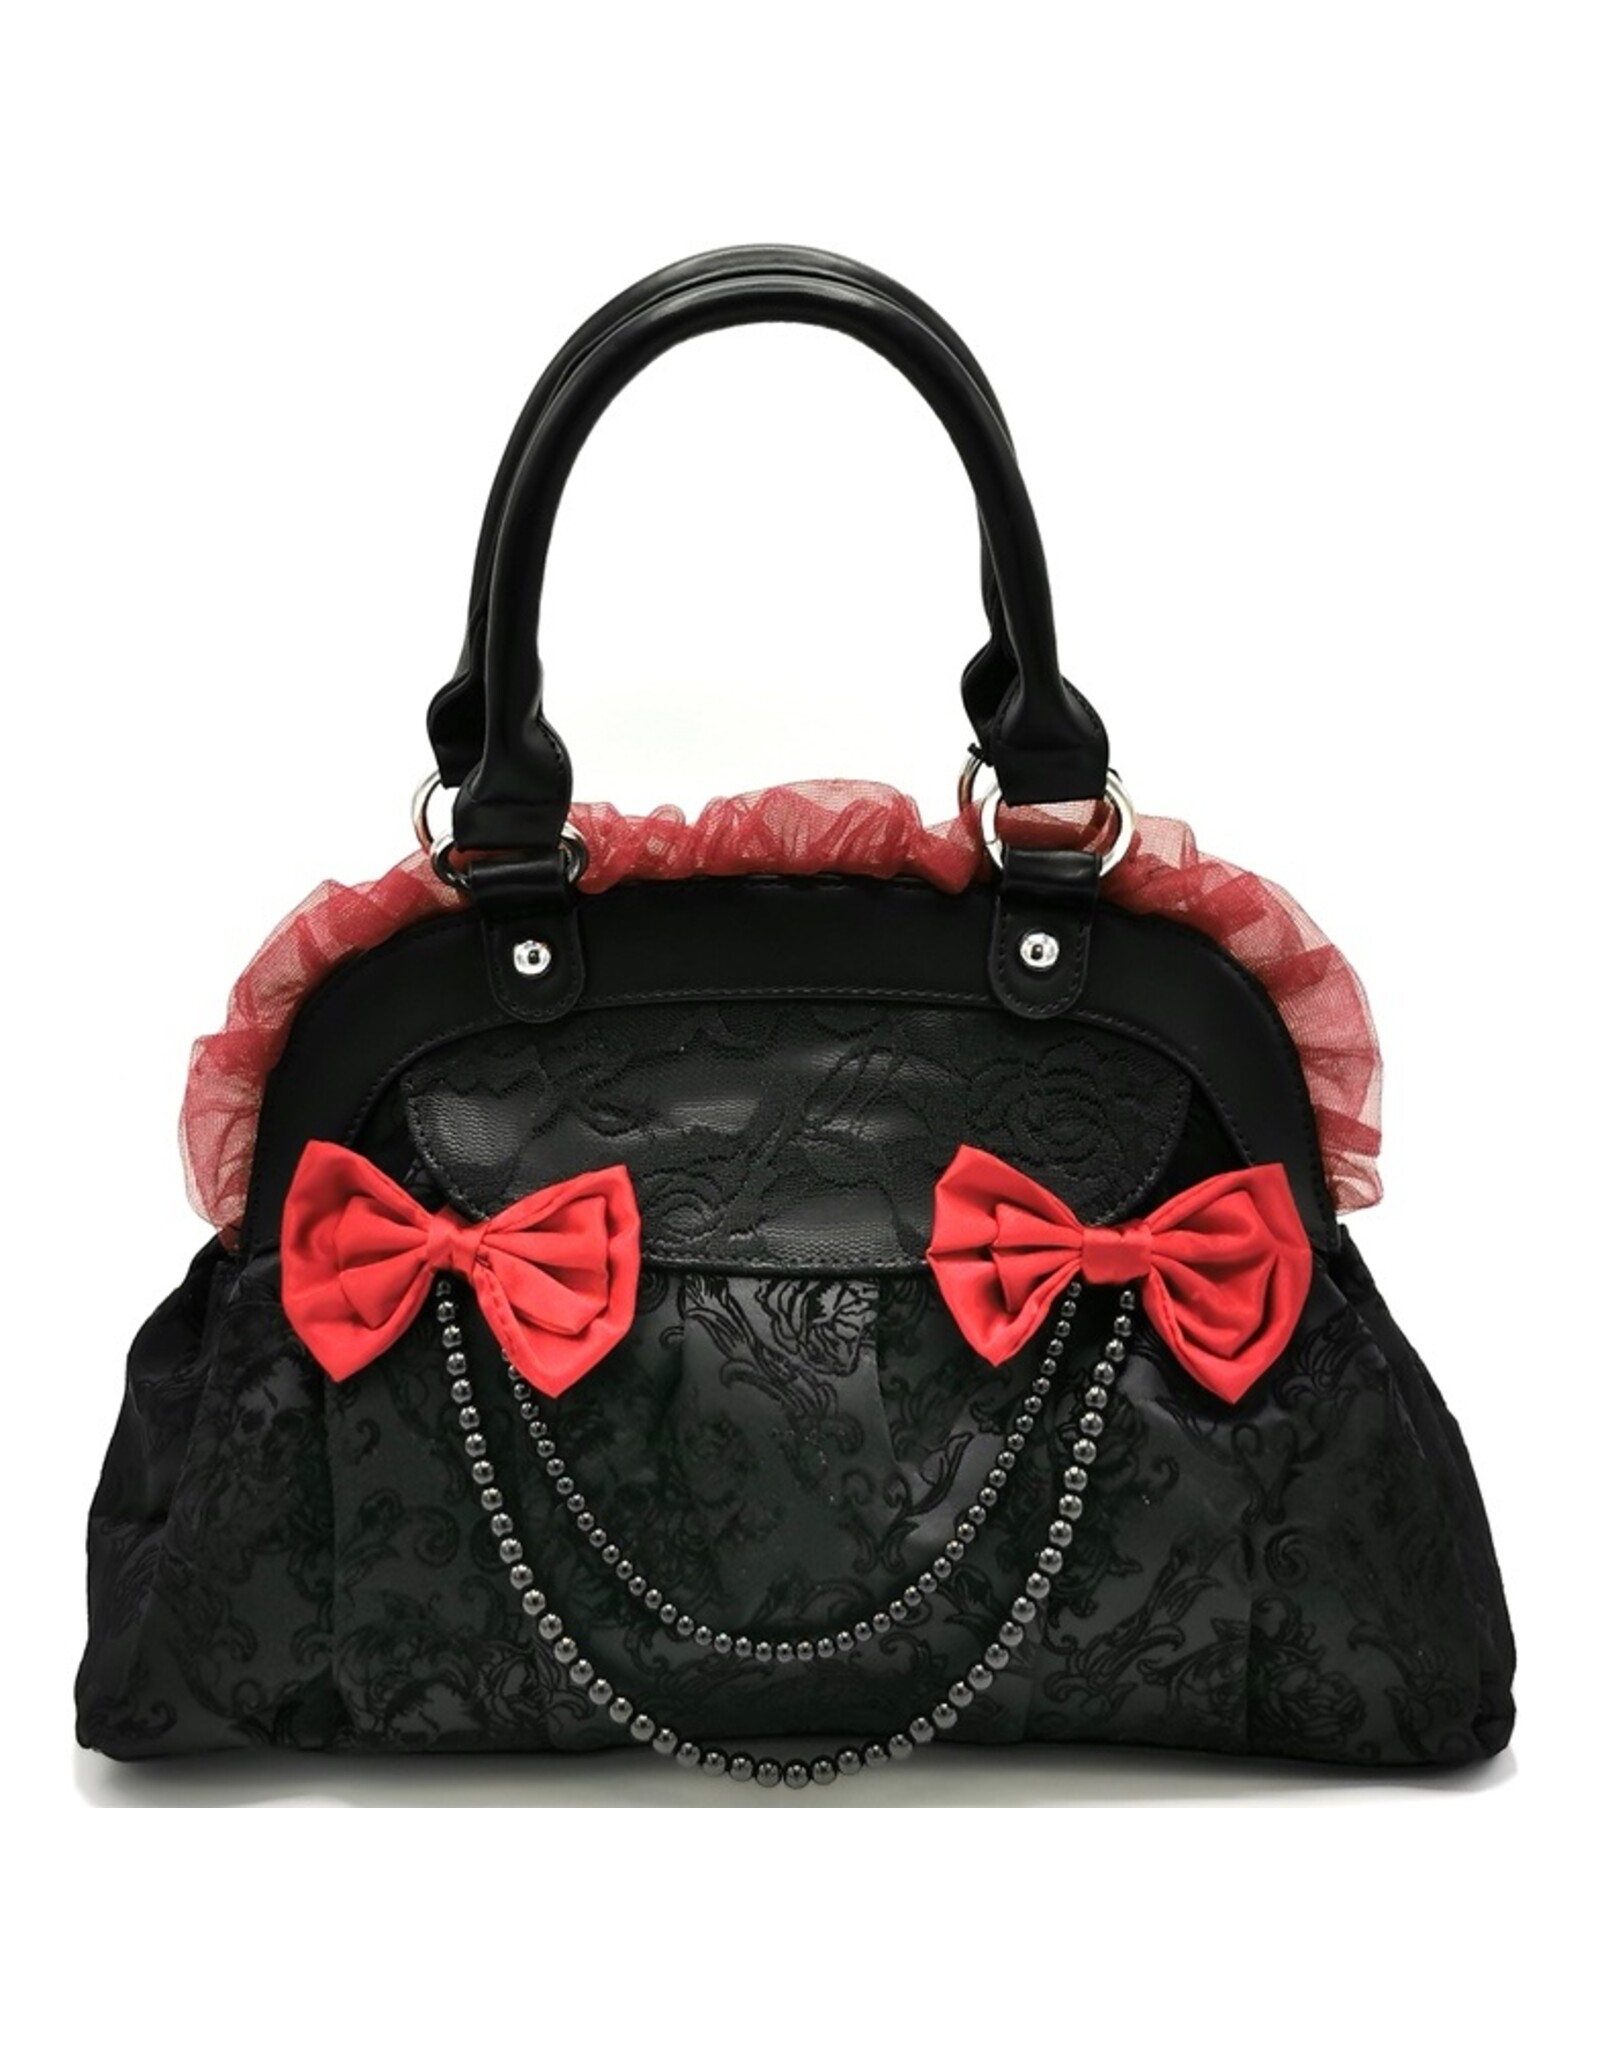 Banned Retro bags  Vintage bags - Reinvention Gothic-Victorian Handbag